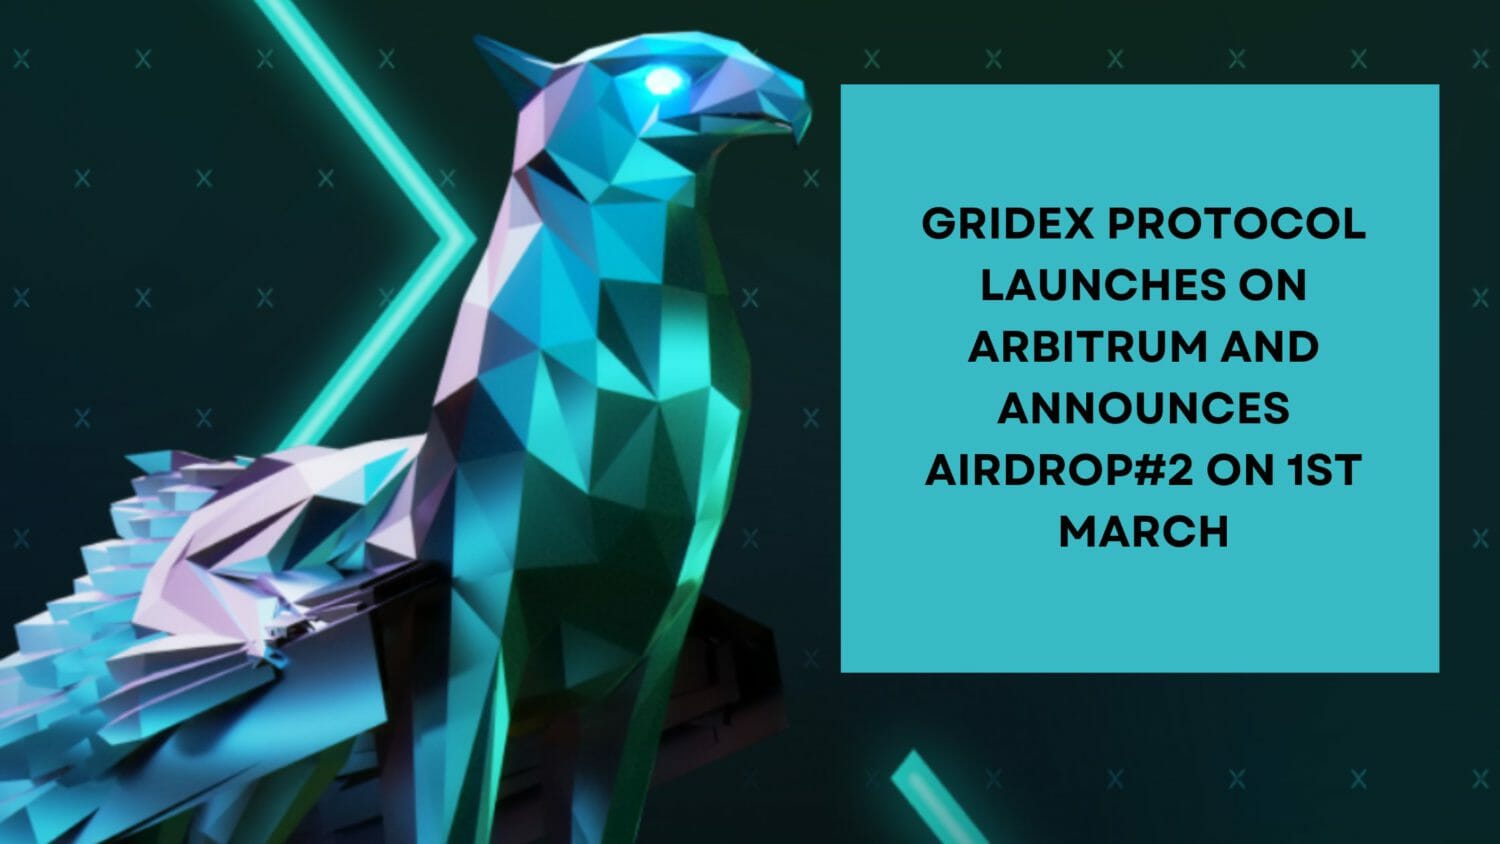 Gridex Protocol Launches On Arbitrum And Announces Airdrop#2 On 1St March